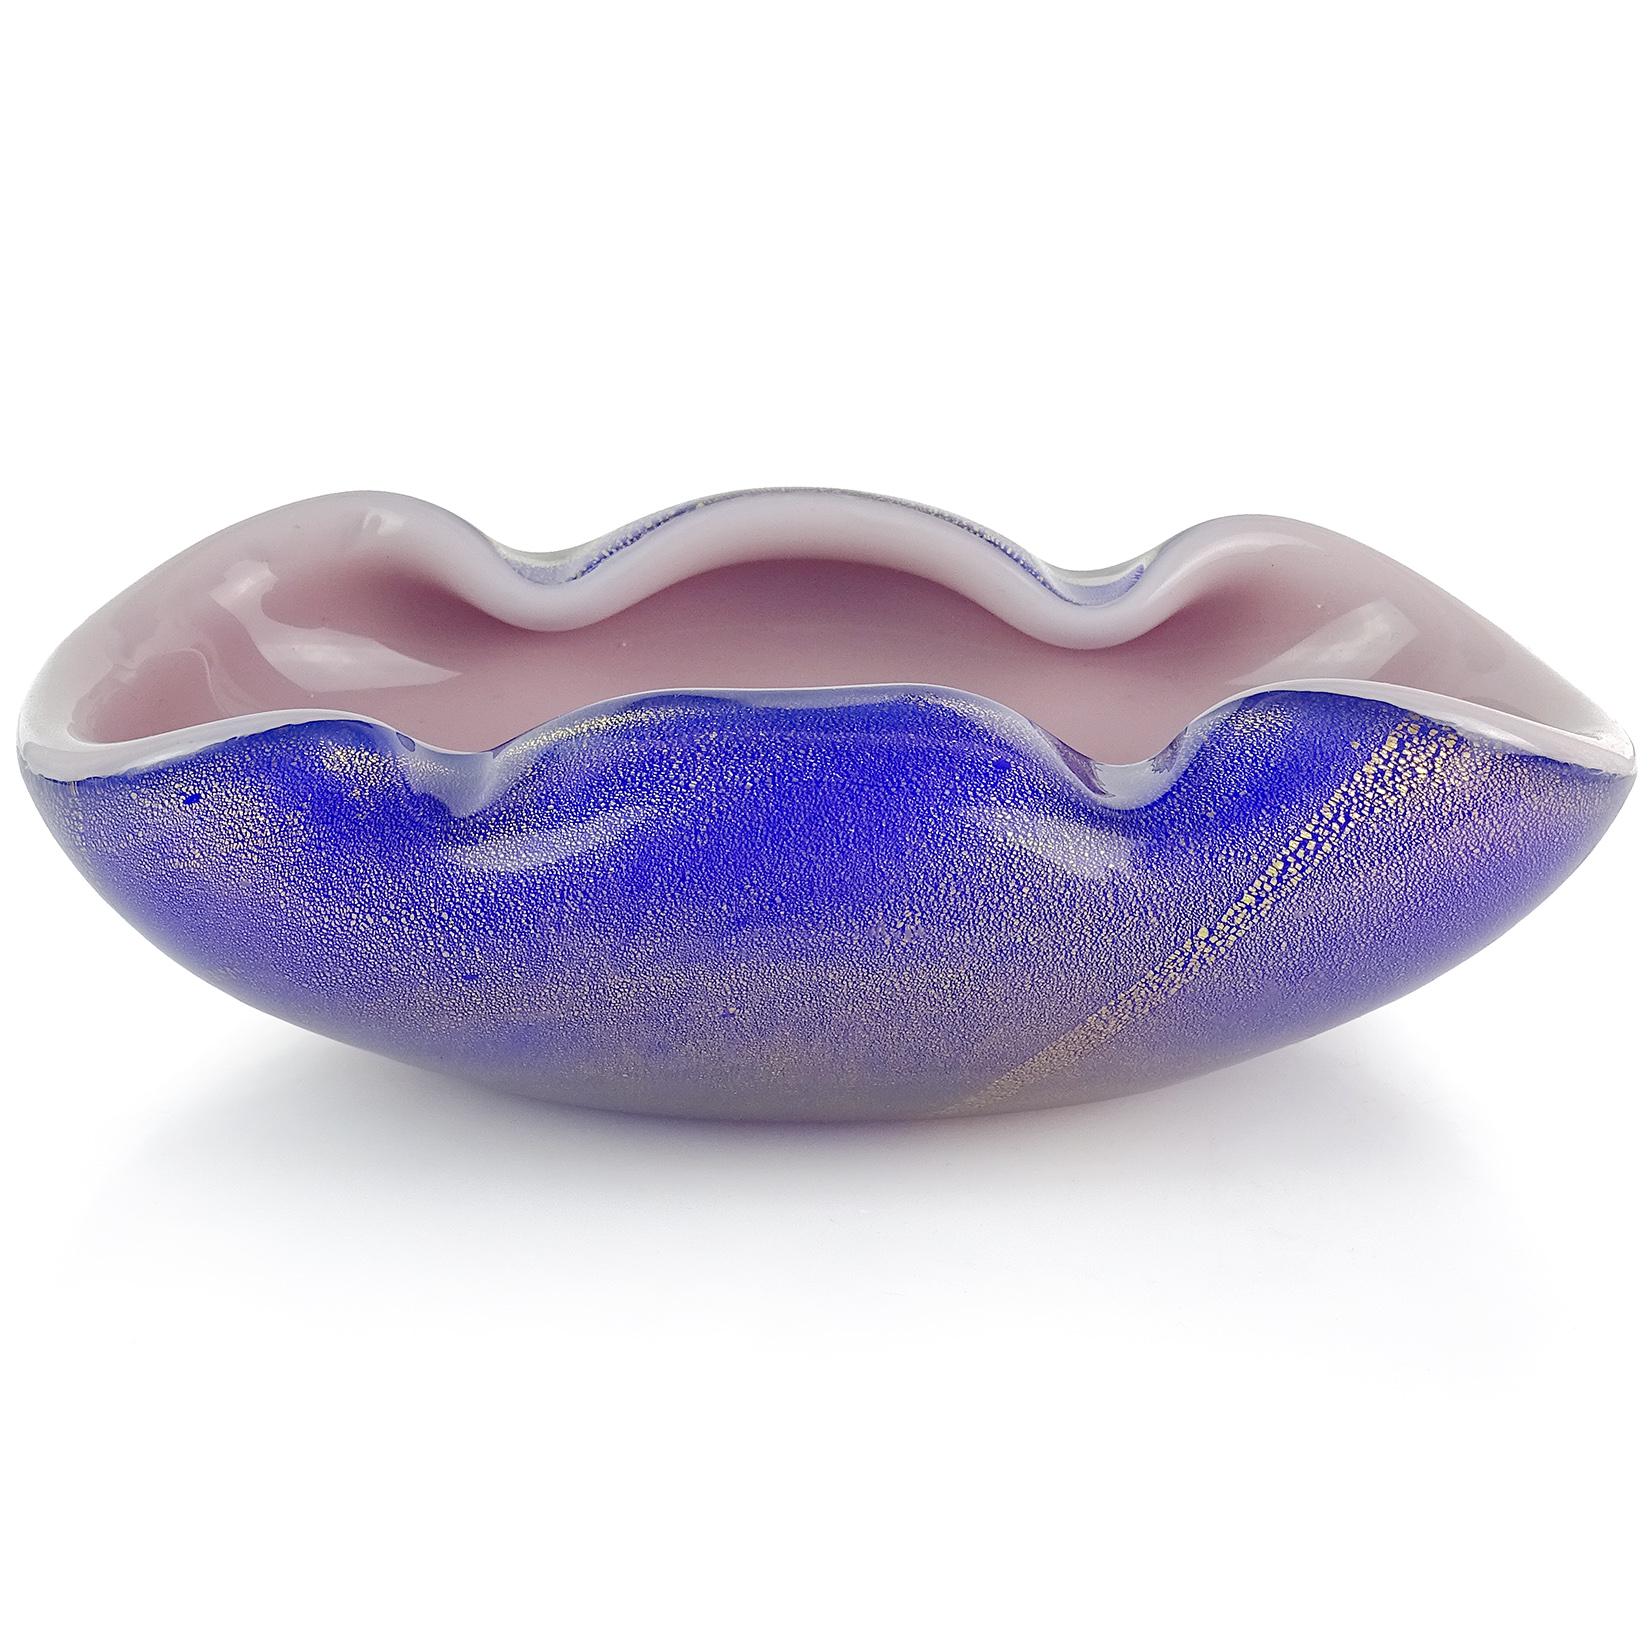 Beautiful vintage Murano hand blown cobalt blue over lavender purple and gold flecks Italian art glass decorative bowl. Documented to designer Archimede Seguso, in the 